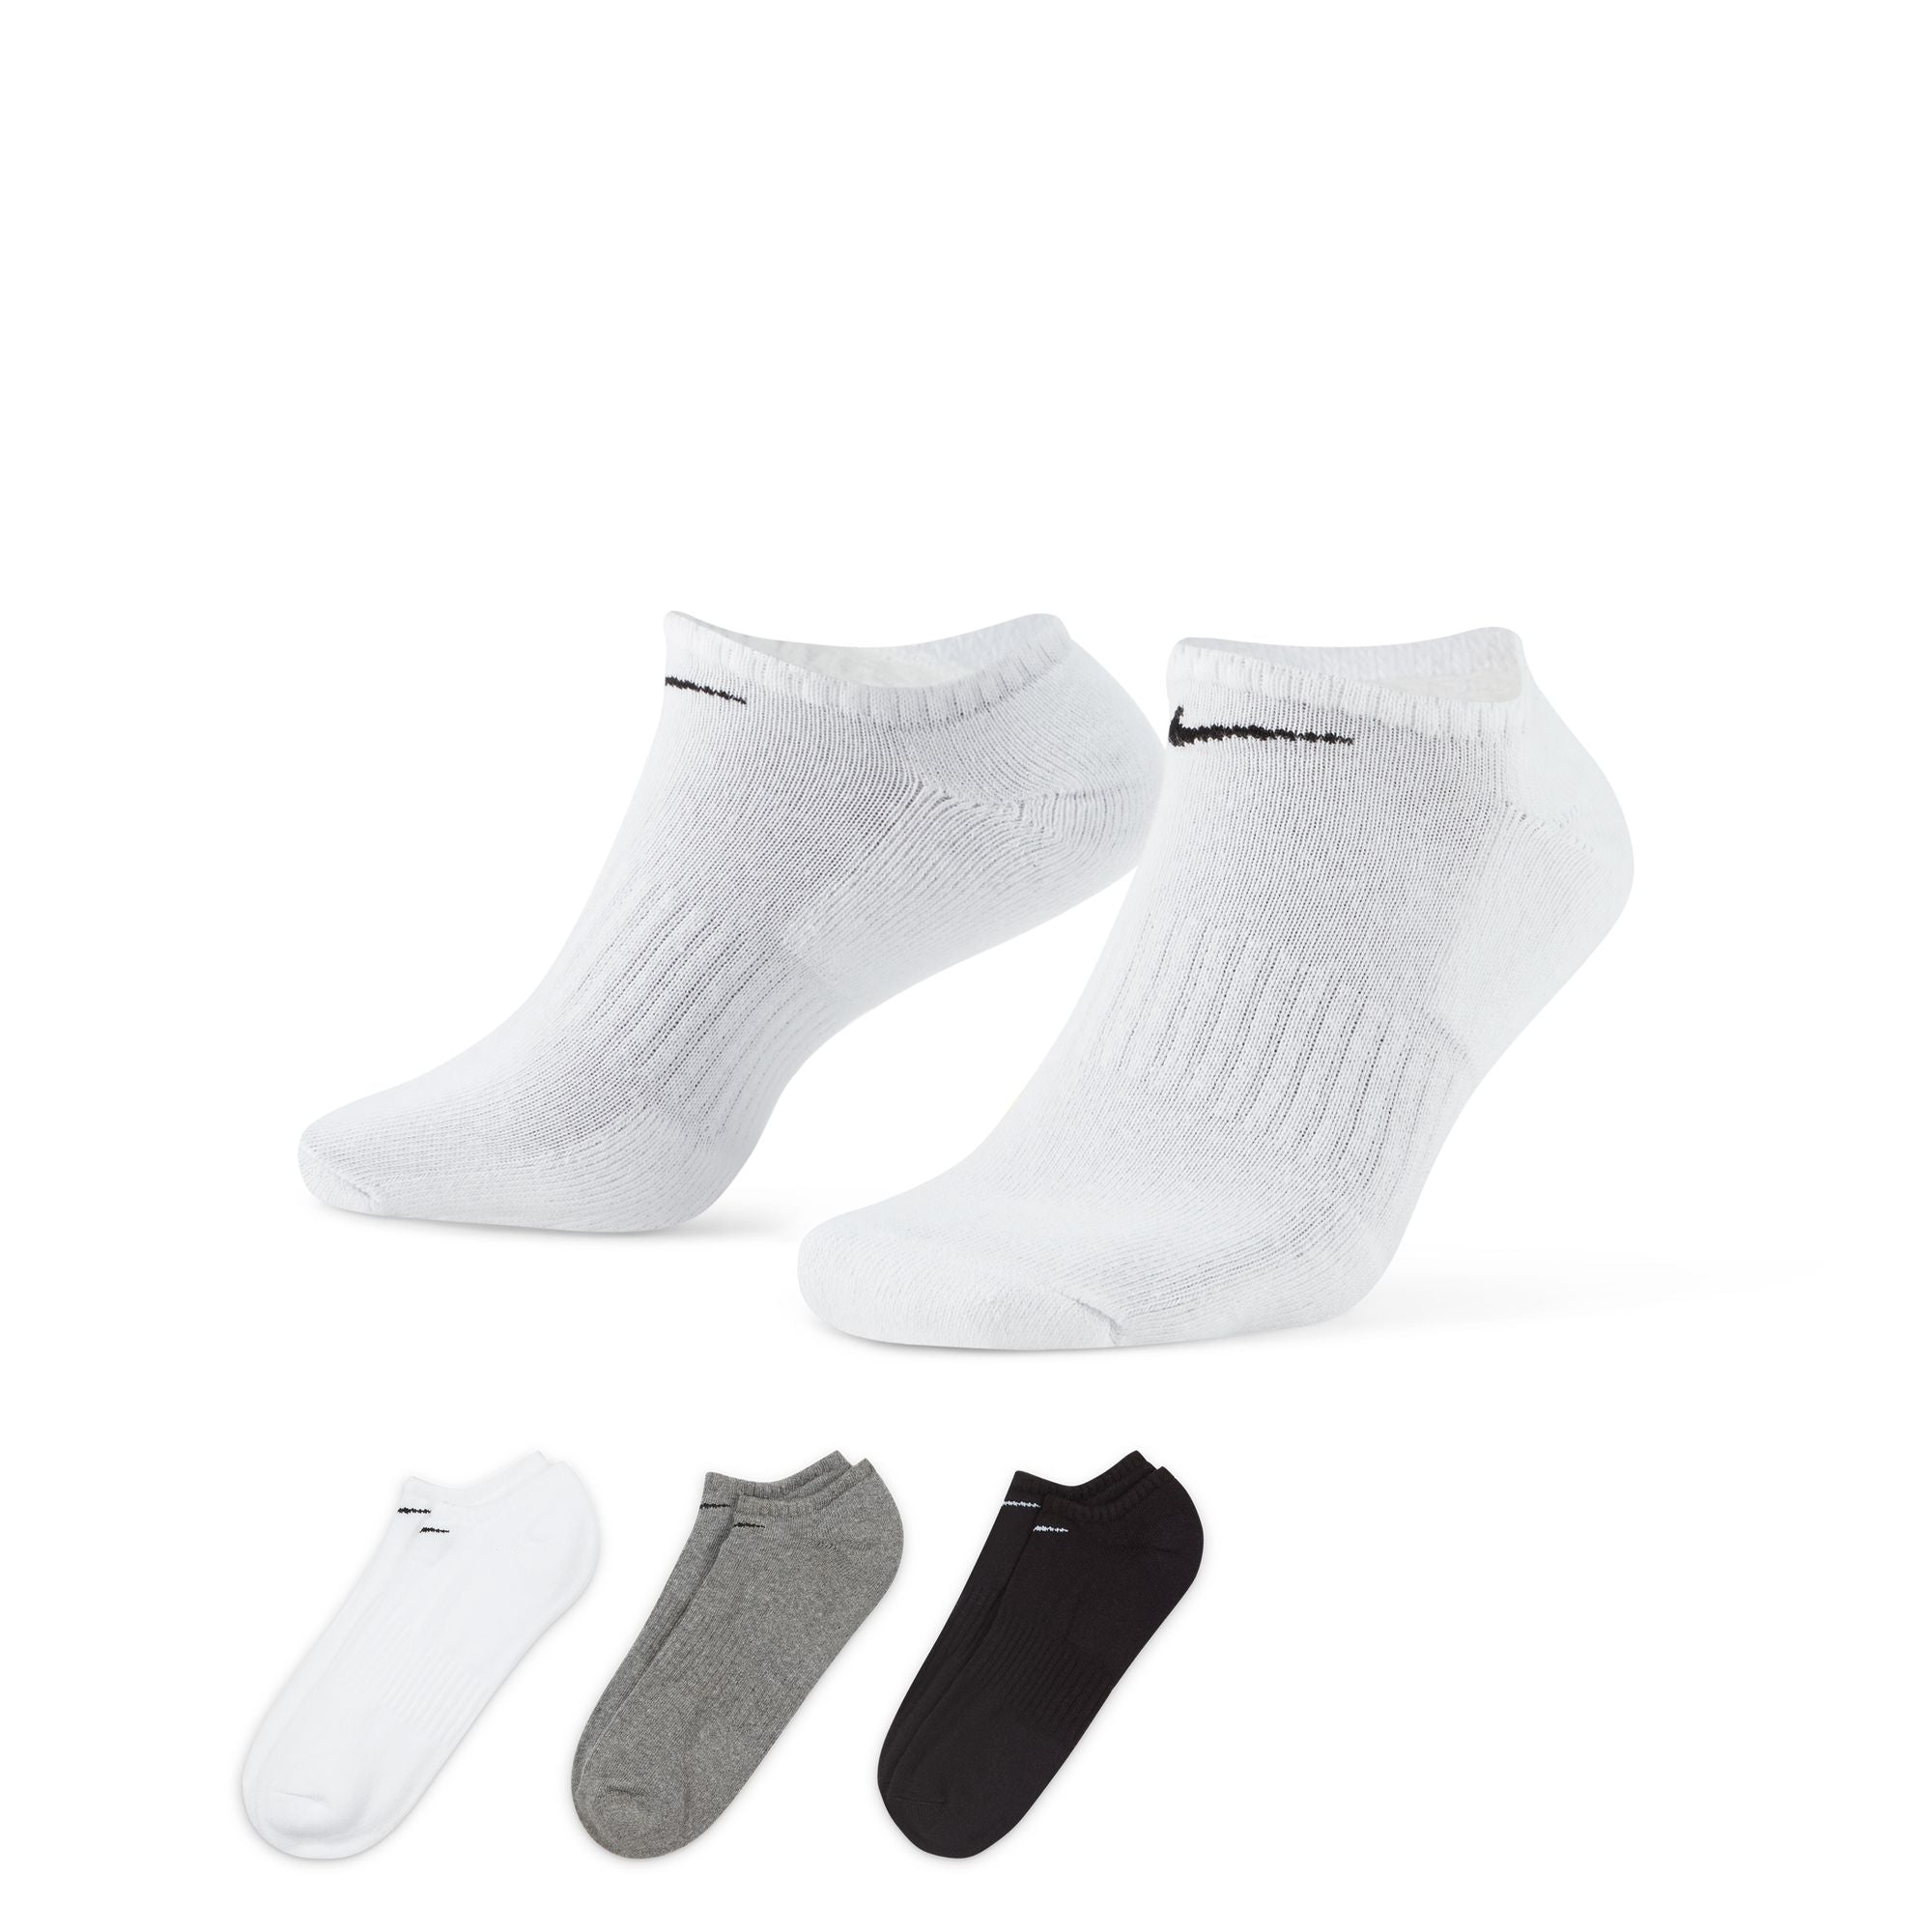 Nike Everyday Cushioned No Show 3 Pack Socks - Assorted Colours